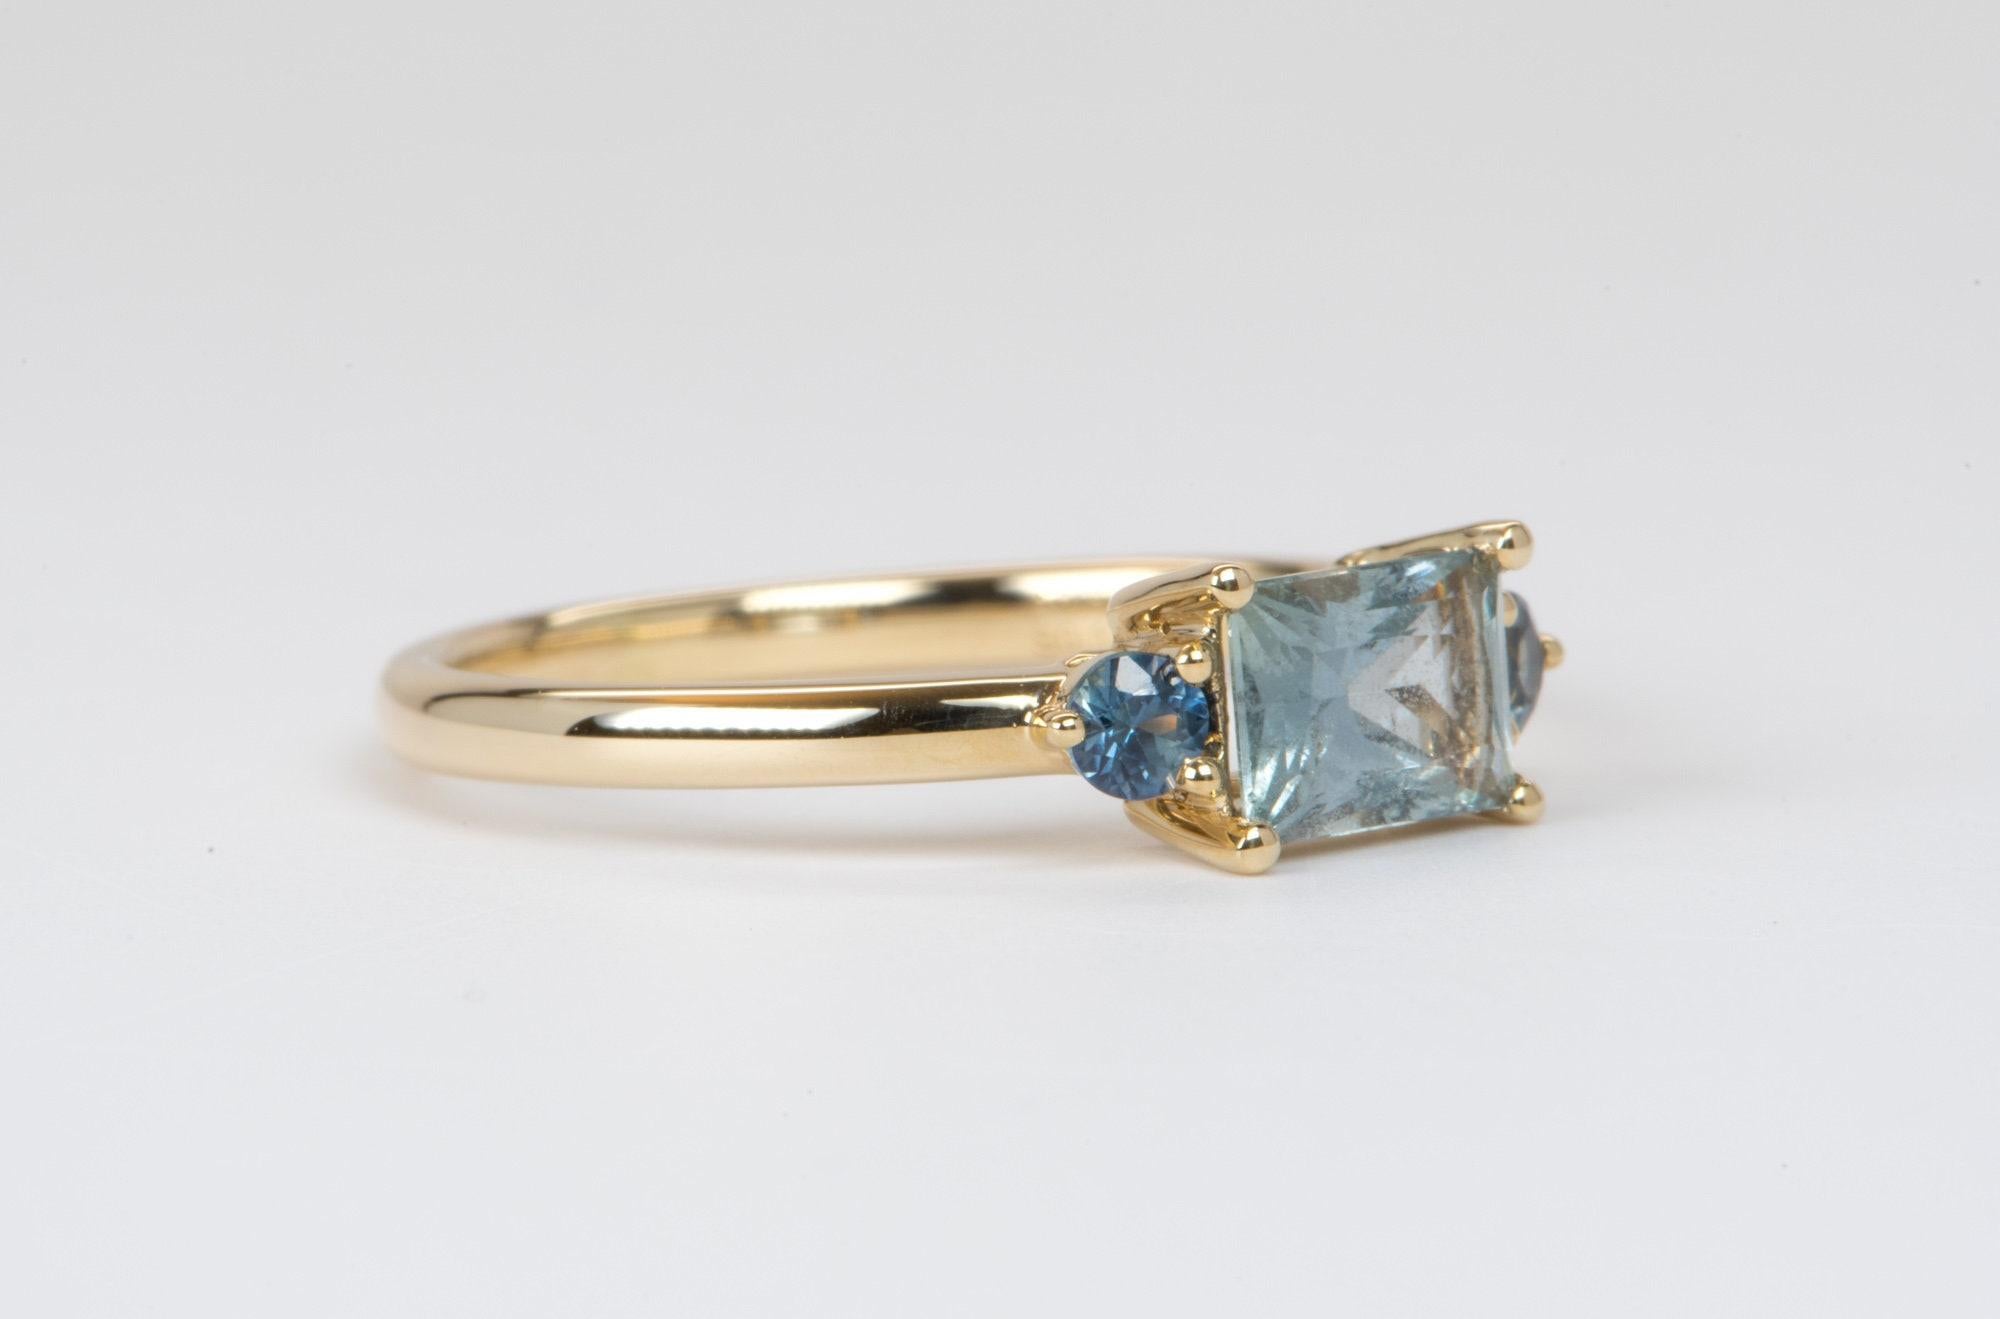 ♥  Solid 14K yellow gold ring set with a rectangle-shaped Montana sapphire, flanked with two sapphires on each side
♥  The overall setting measures 12.1mm in width, 5.3mm in length, and sits 4.0mm tall from the finger

♥  Ring size: US Size 6.5